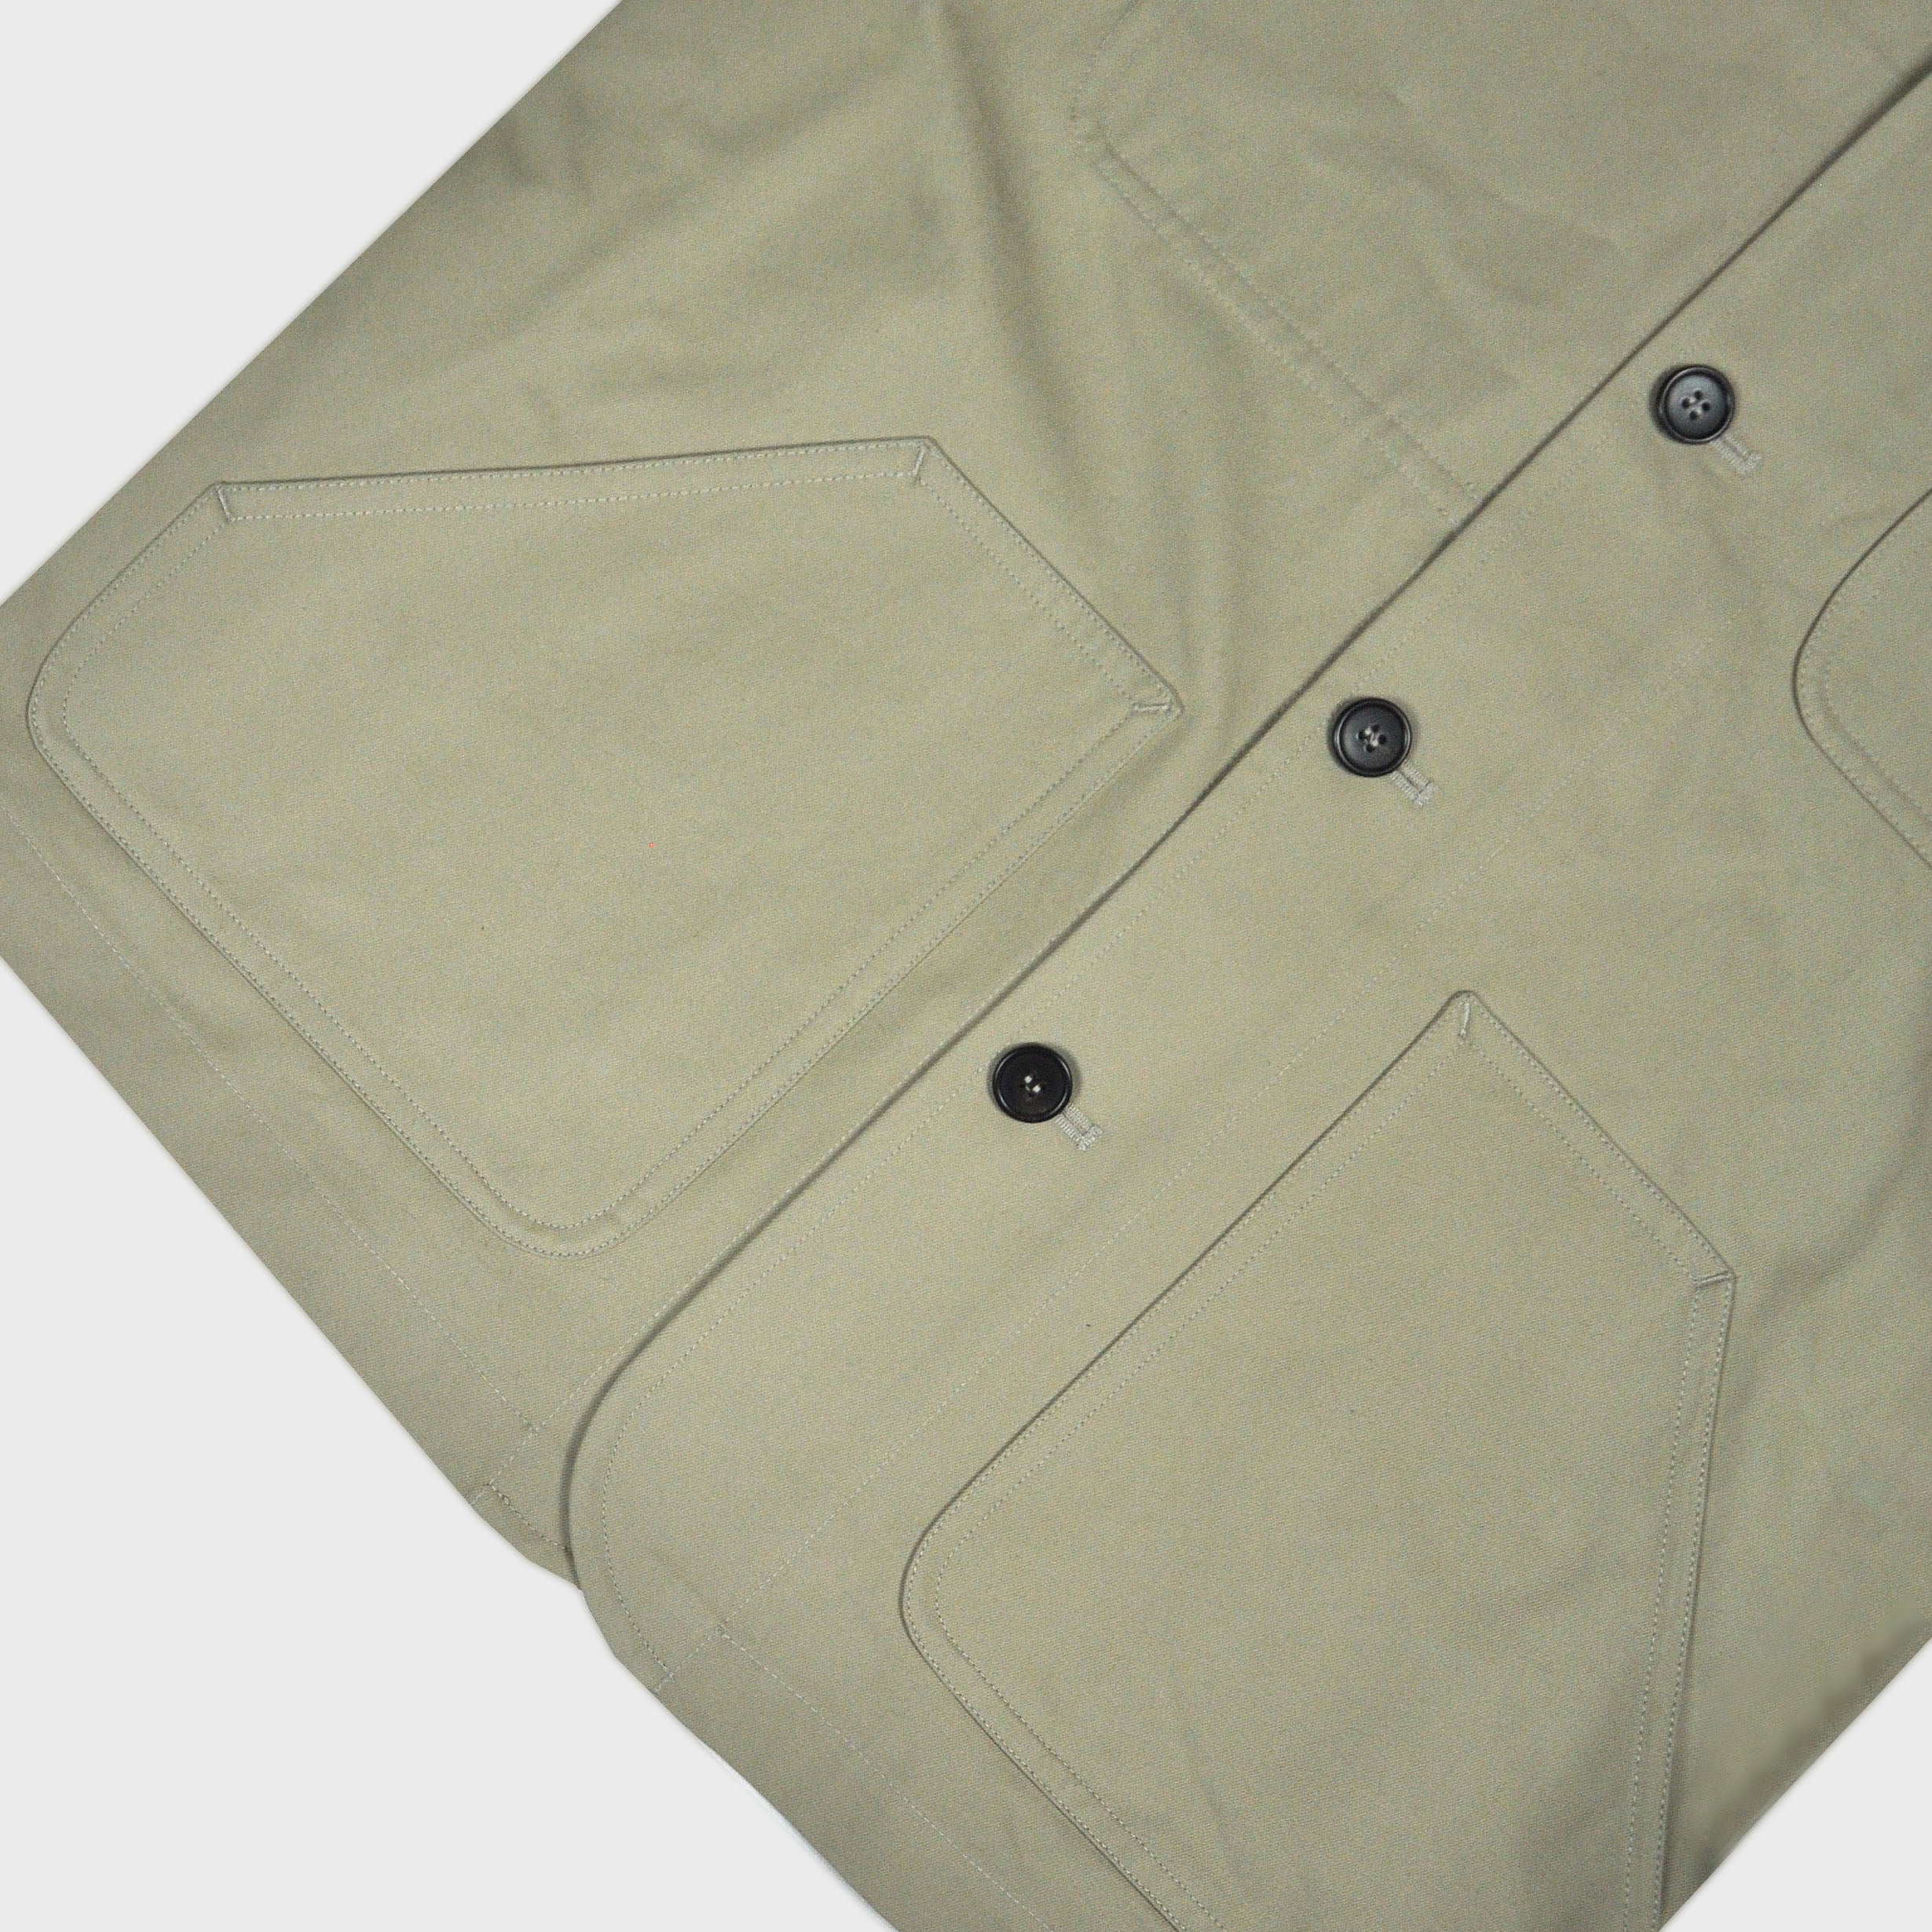 Heavy Cotton Worker Jacket in Stone with Blue (under) Collar